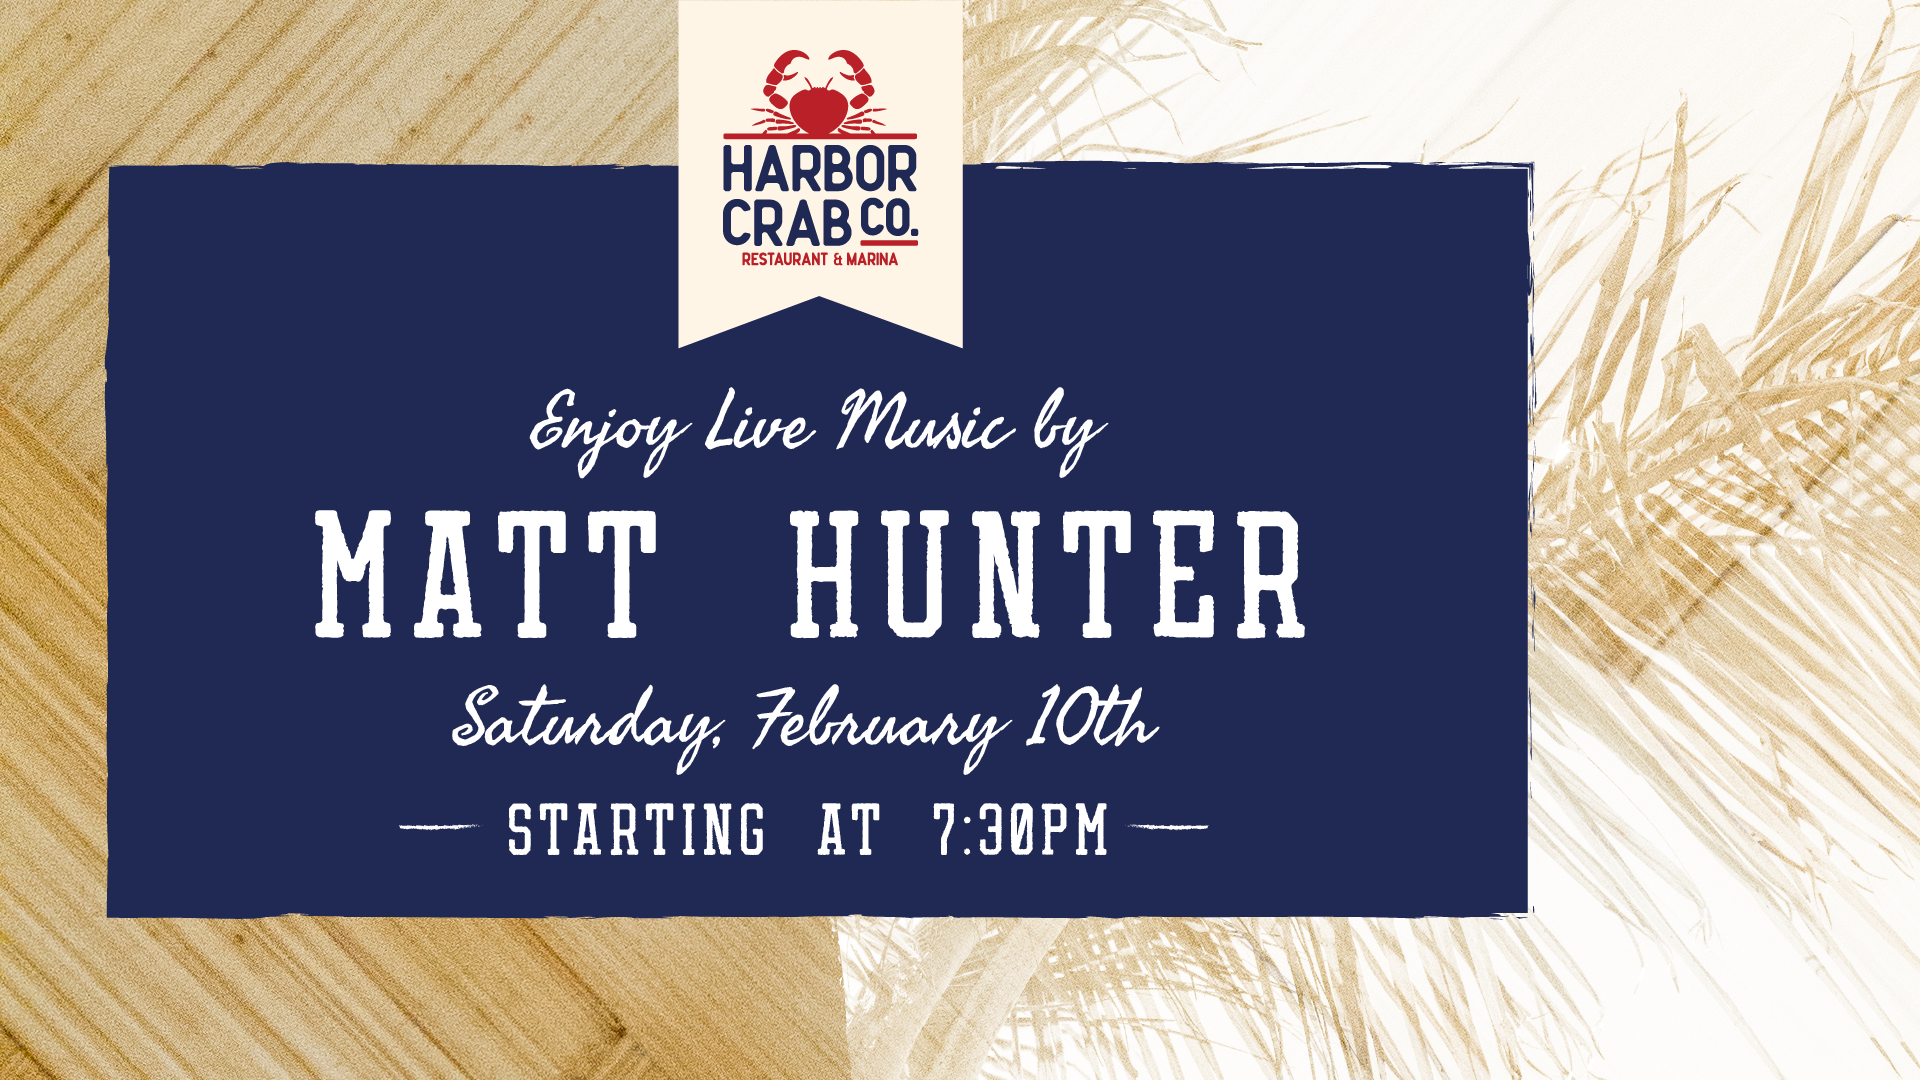 Promotional event poster for Harbor Crab Co. featuring live music by Matt Hunter on Saturday, February 10th, starting at 7:30 PM.